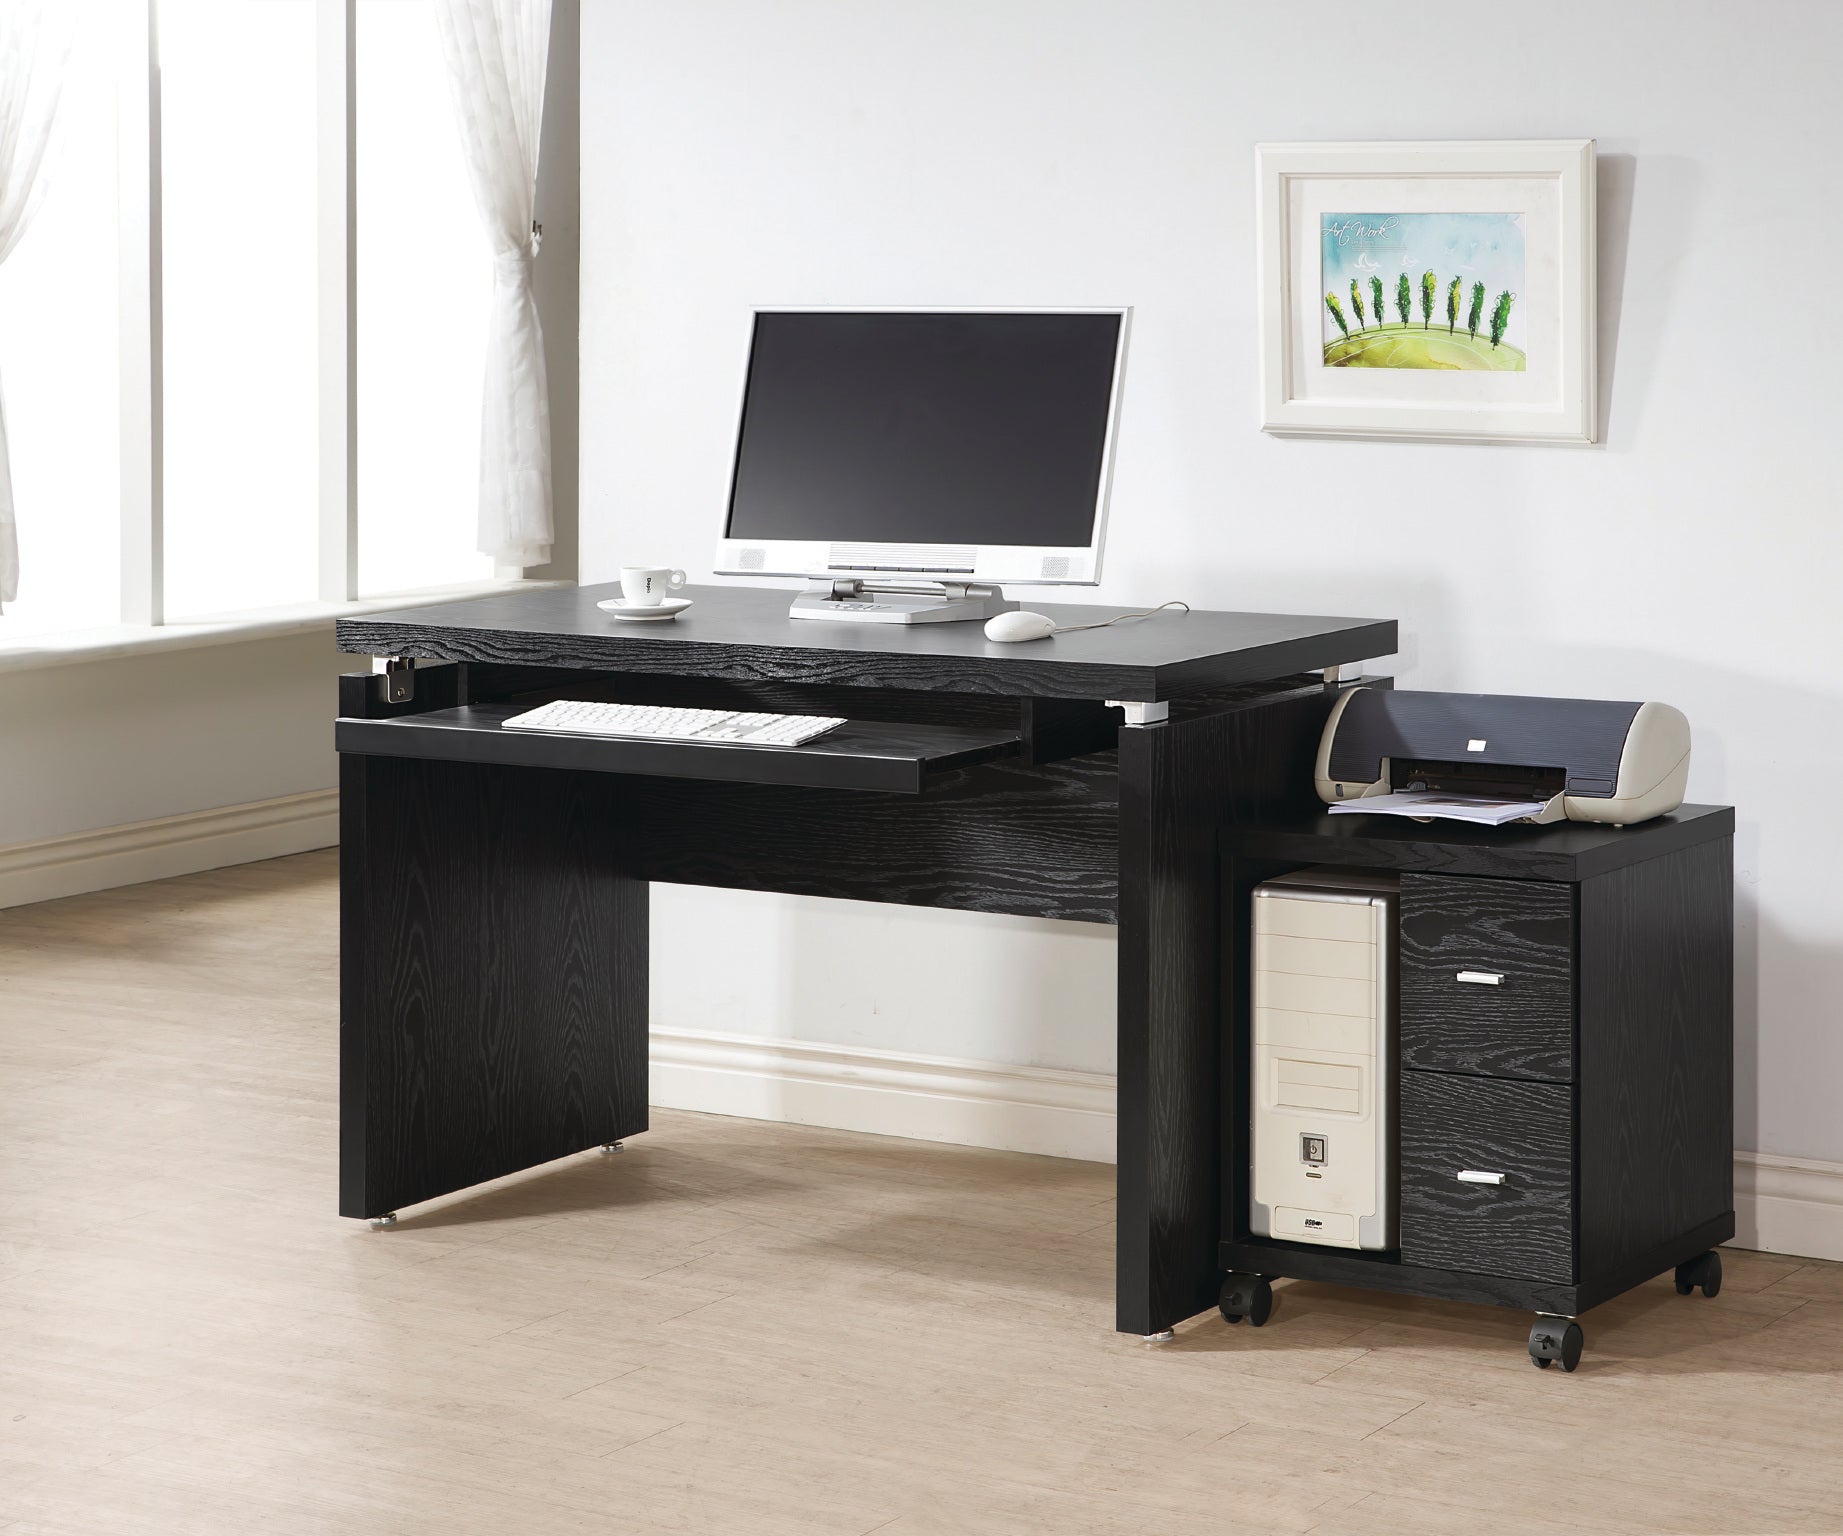 OF6386 - Office Desk and Mobile CPU Stand